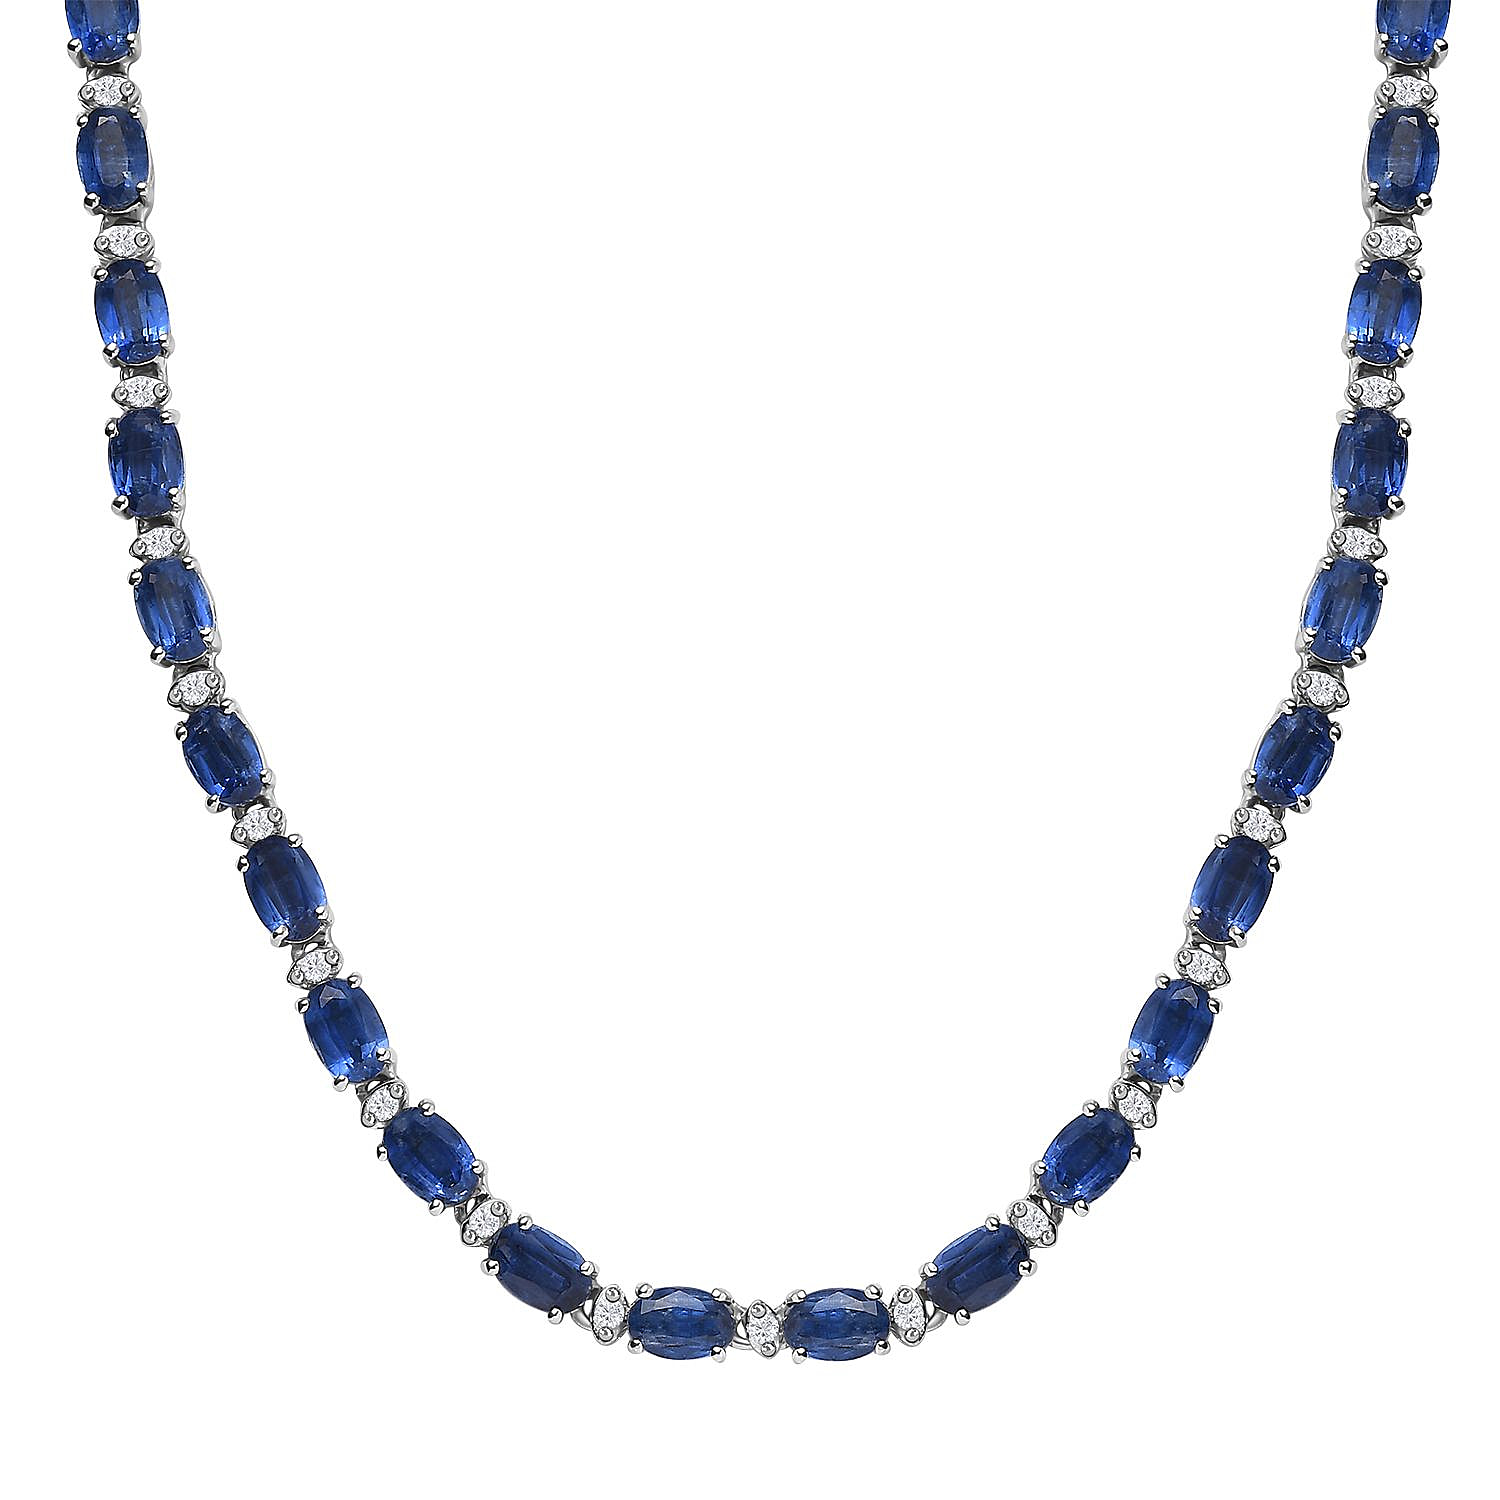 Kyanite and Natural Zircon Necklace (Size - 20) in Platinum Overlay Sterling Silver 38.54 Ct, Silver Wt. 19.28 Gm